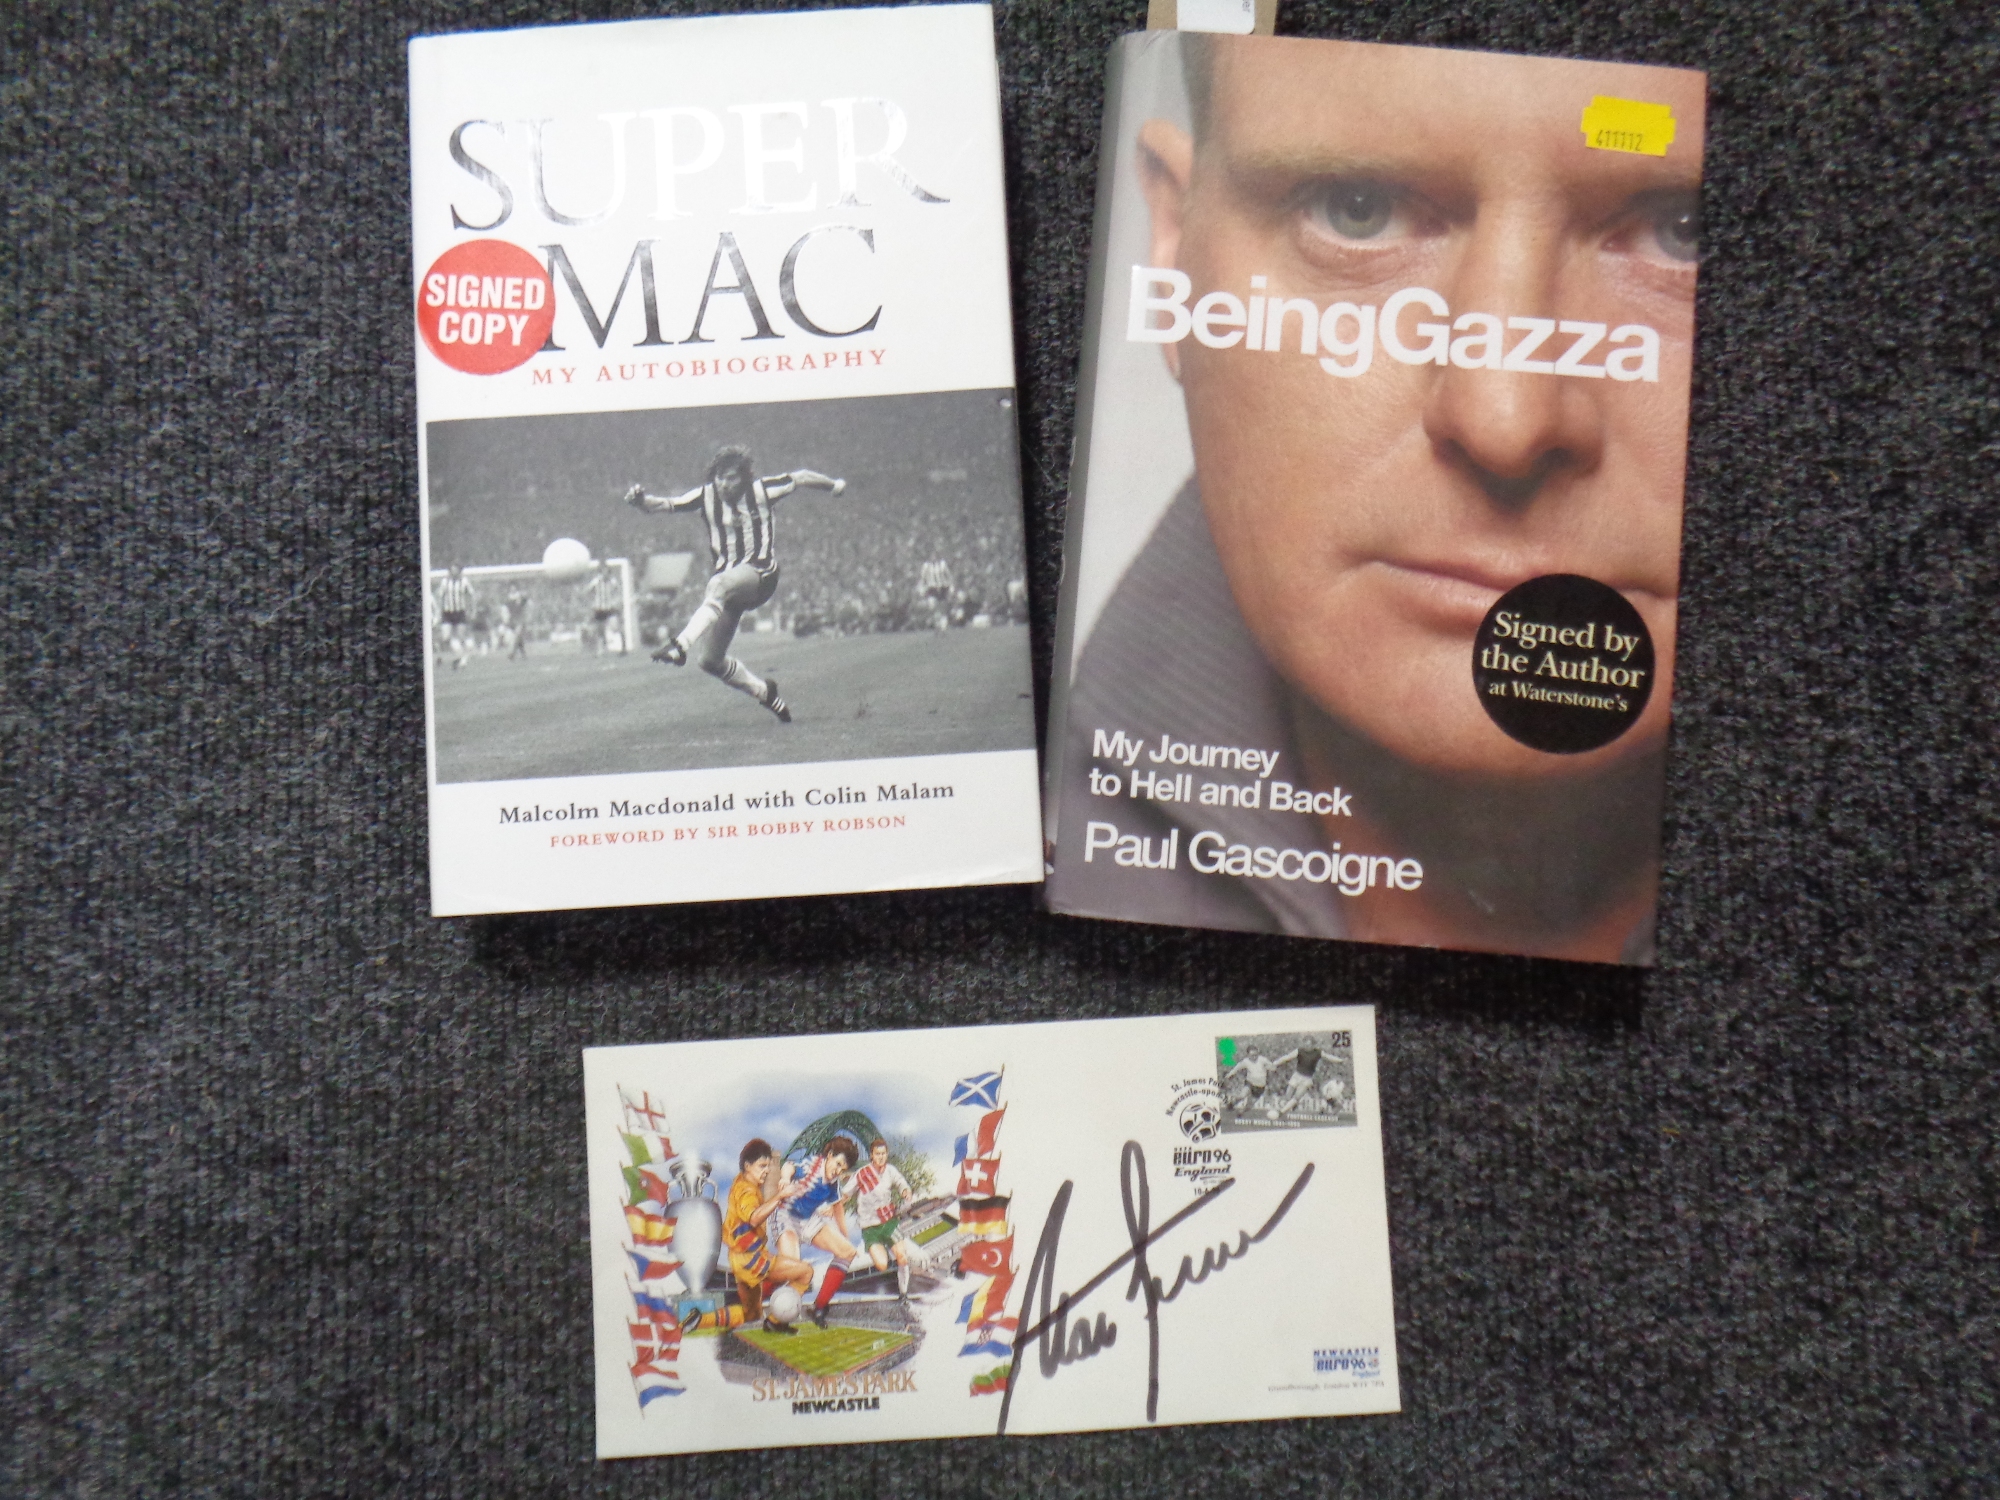 Two volumes; Being Gazza and Super Mac, both signed.